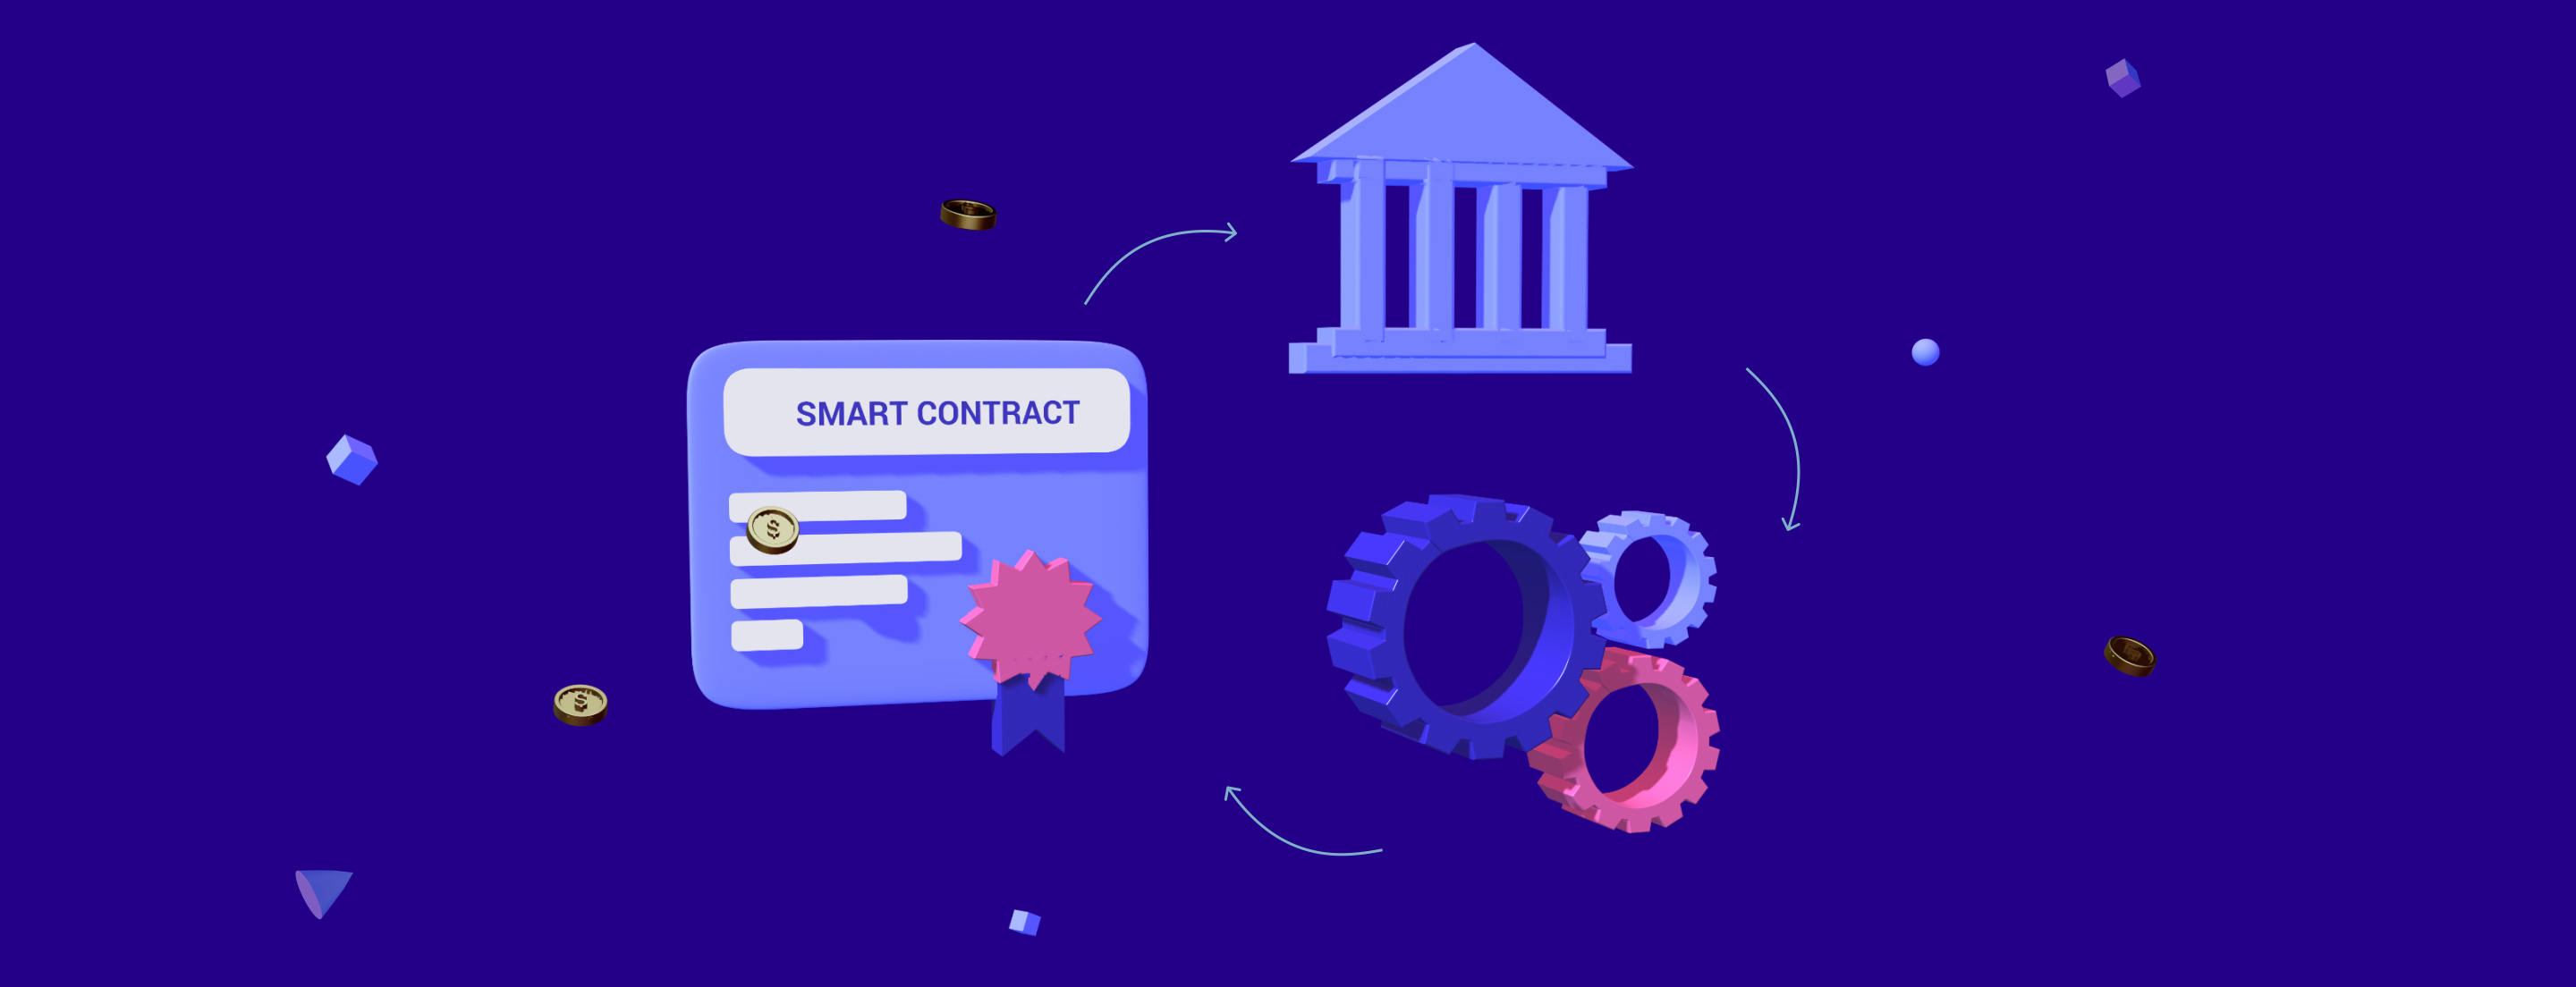 how-smart-contracts-work-for-sale-a-house